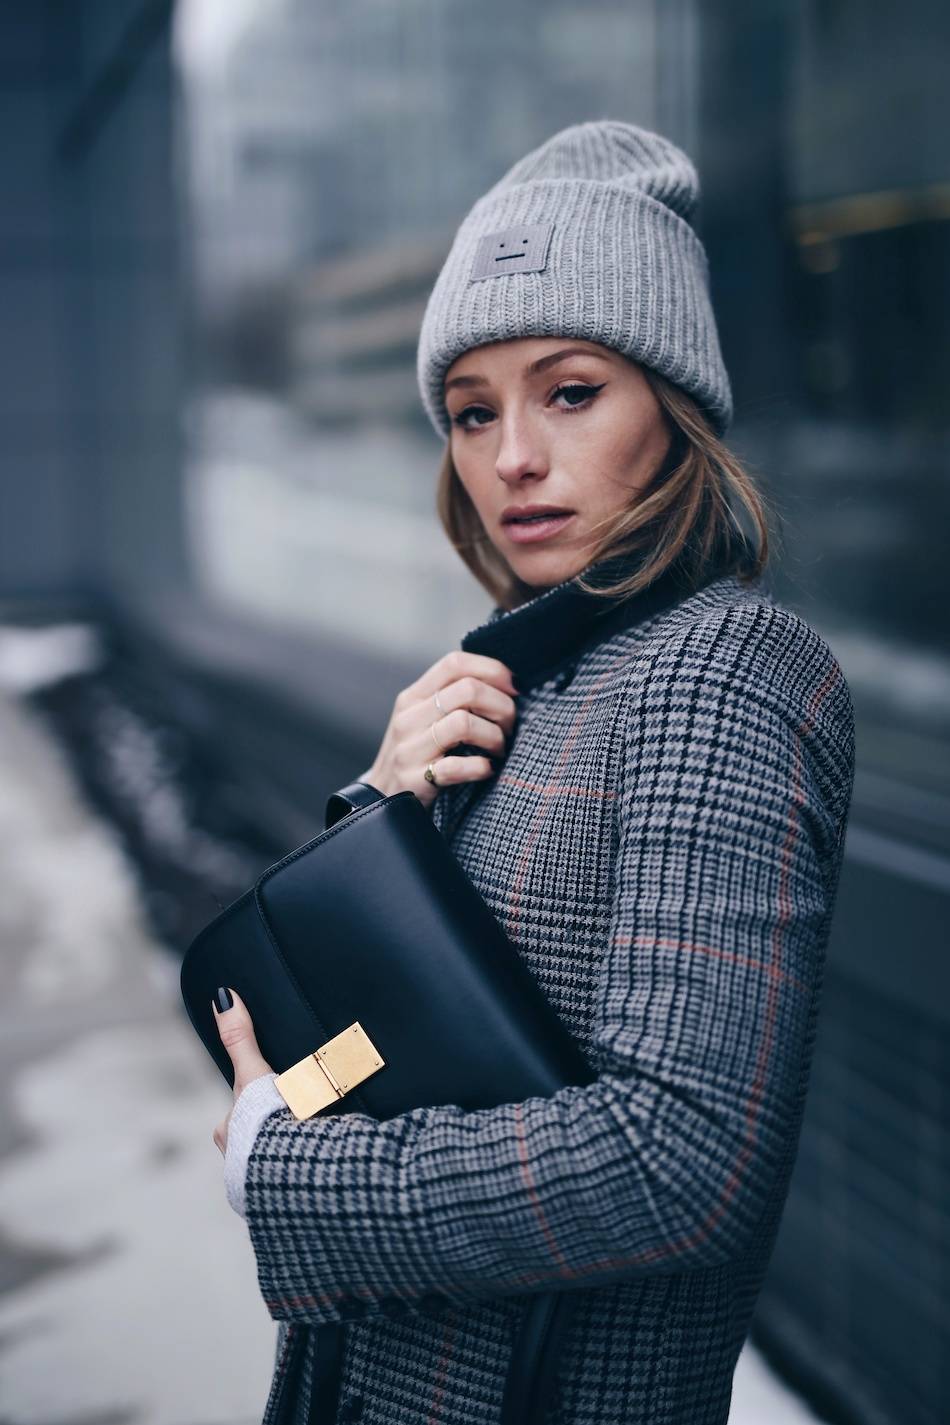 Style and beauty blogger Jill Lansky of The August Diaries on how to stay warm + stylish in the winter in Acne Pansy toque, cat eye makeup